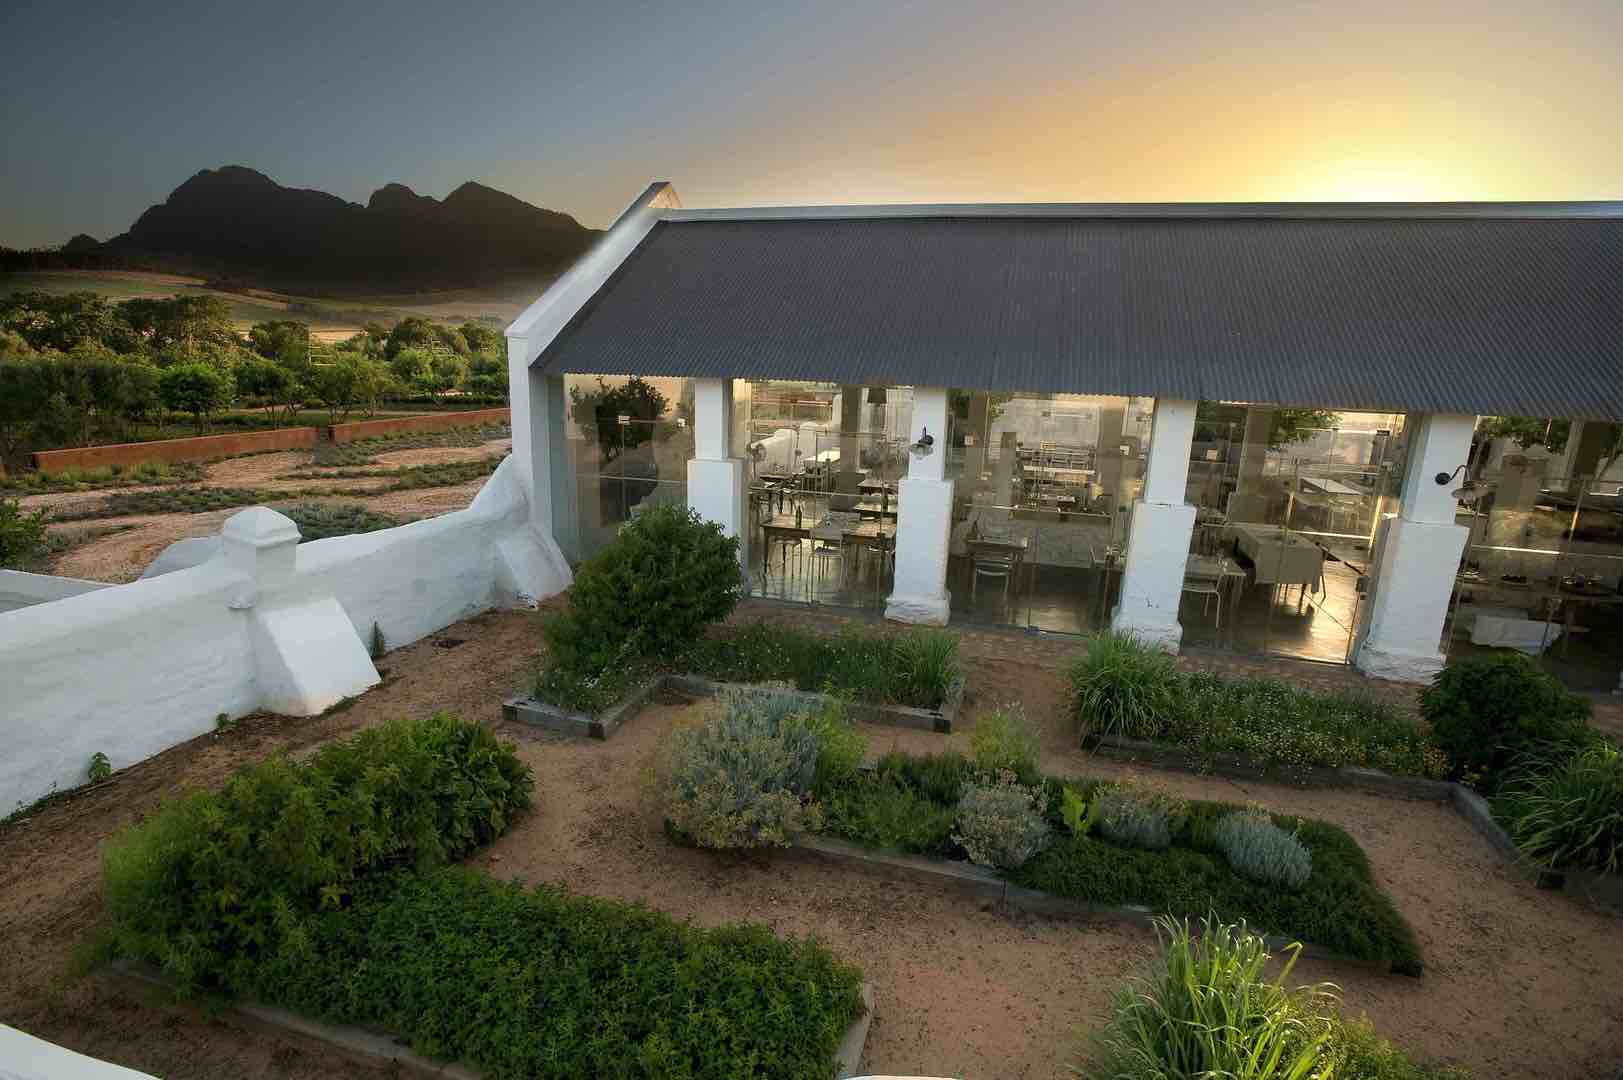 One of the most famous restaurants in the world, and definitely in Cape Winelands - Babrl at Babylonstoren